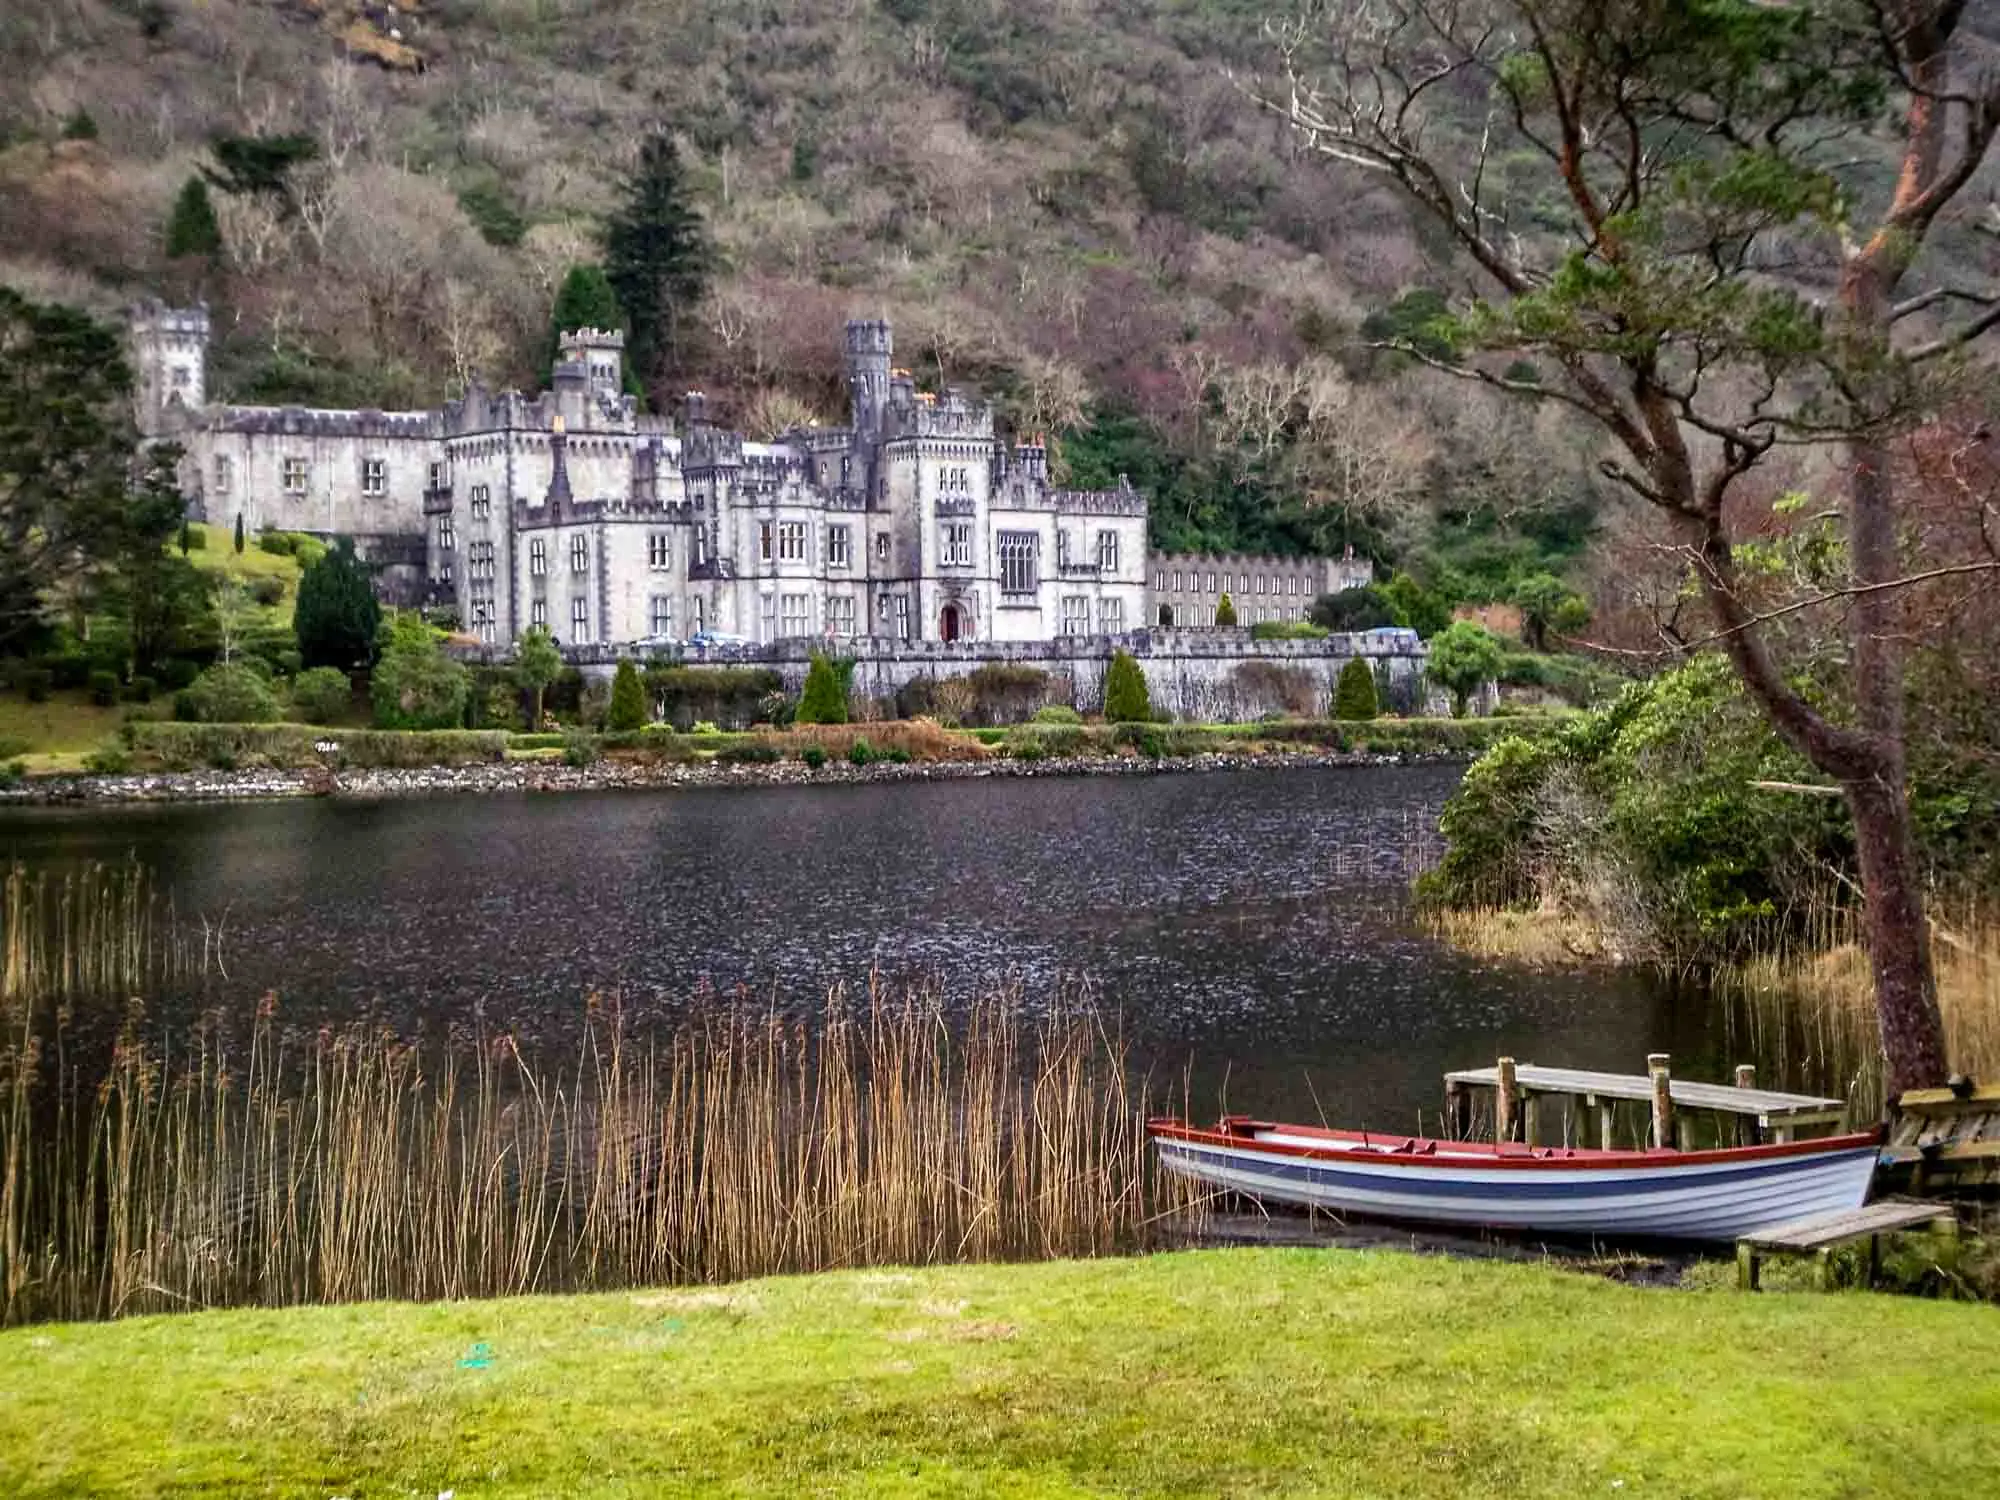 Large mansion at the base of a mountain with a rowboat and lake in the foreground